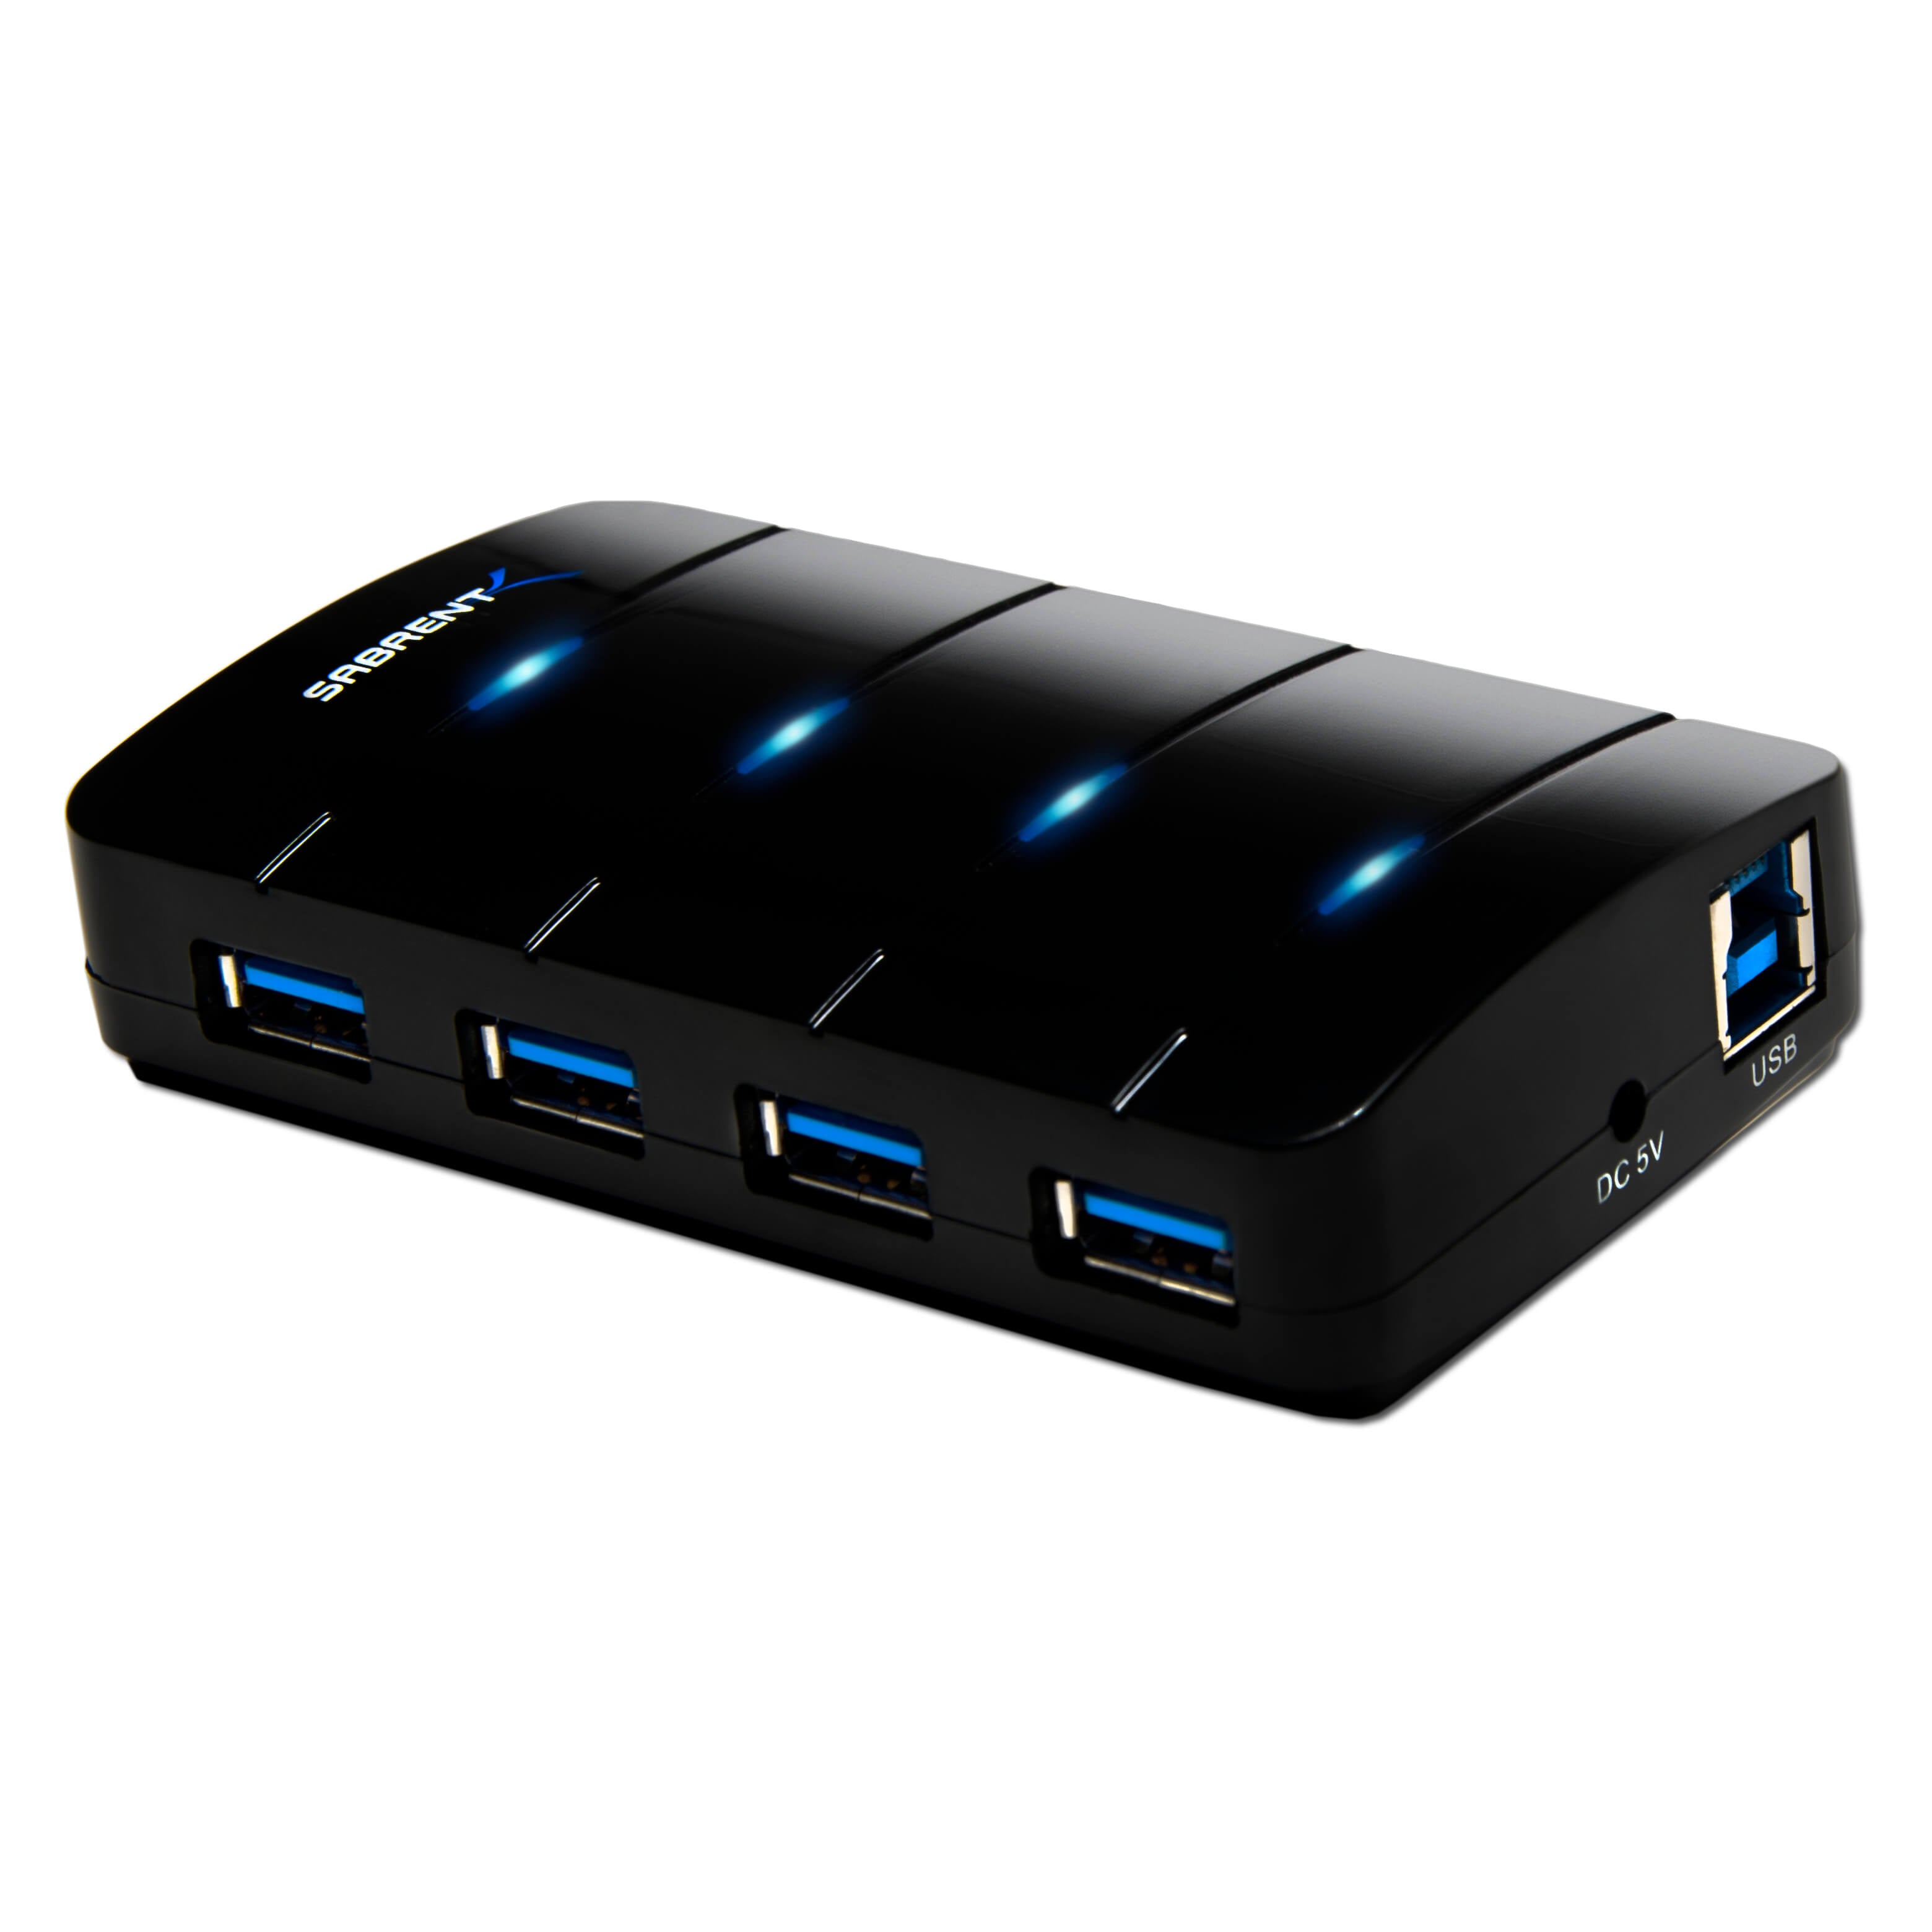 4 Port USB 3.0 Hub with 4A Power Adapter